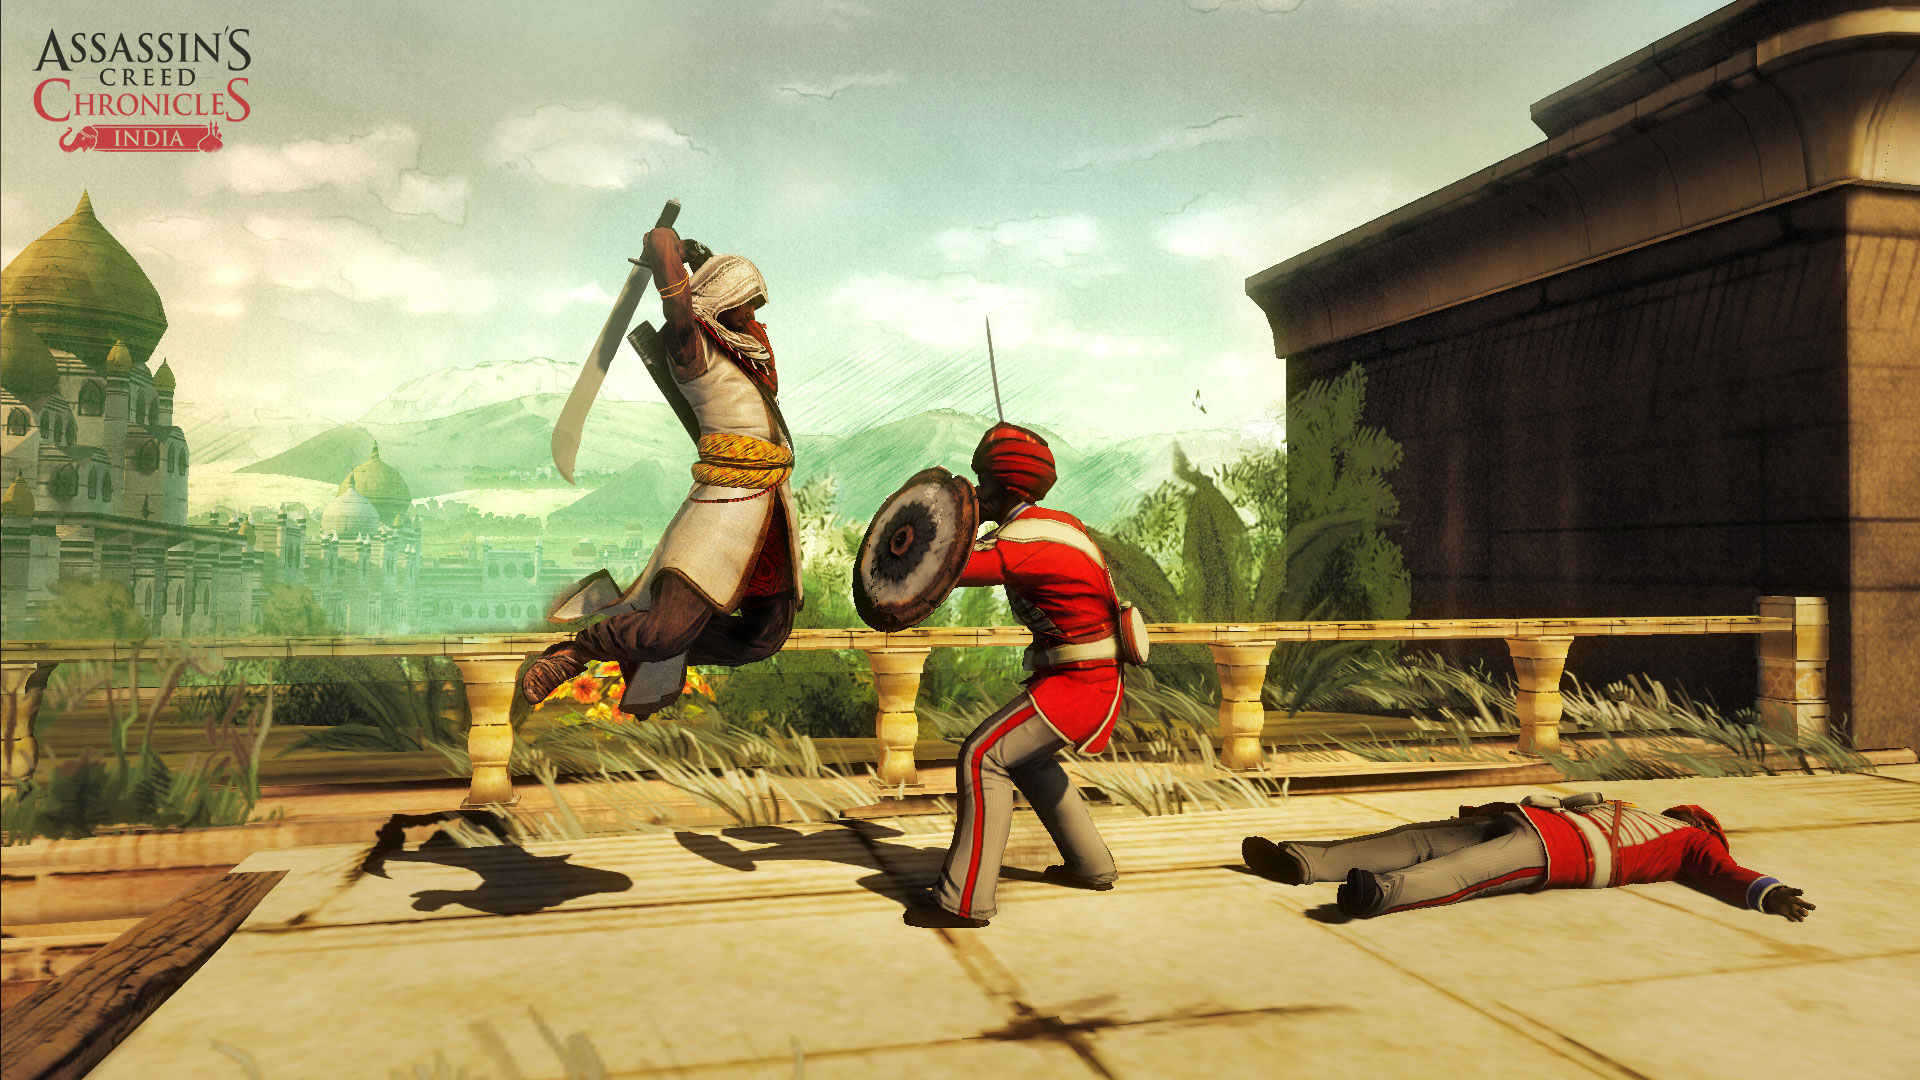 Assassin's Creed Chronicles #16